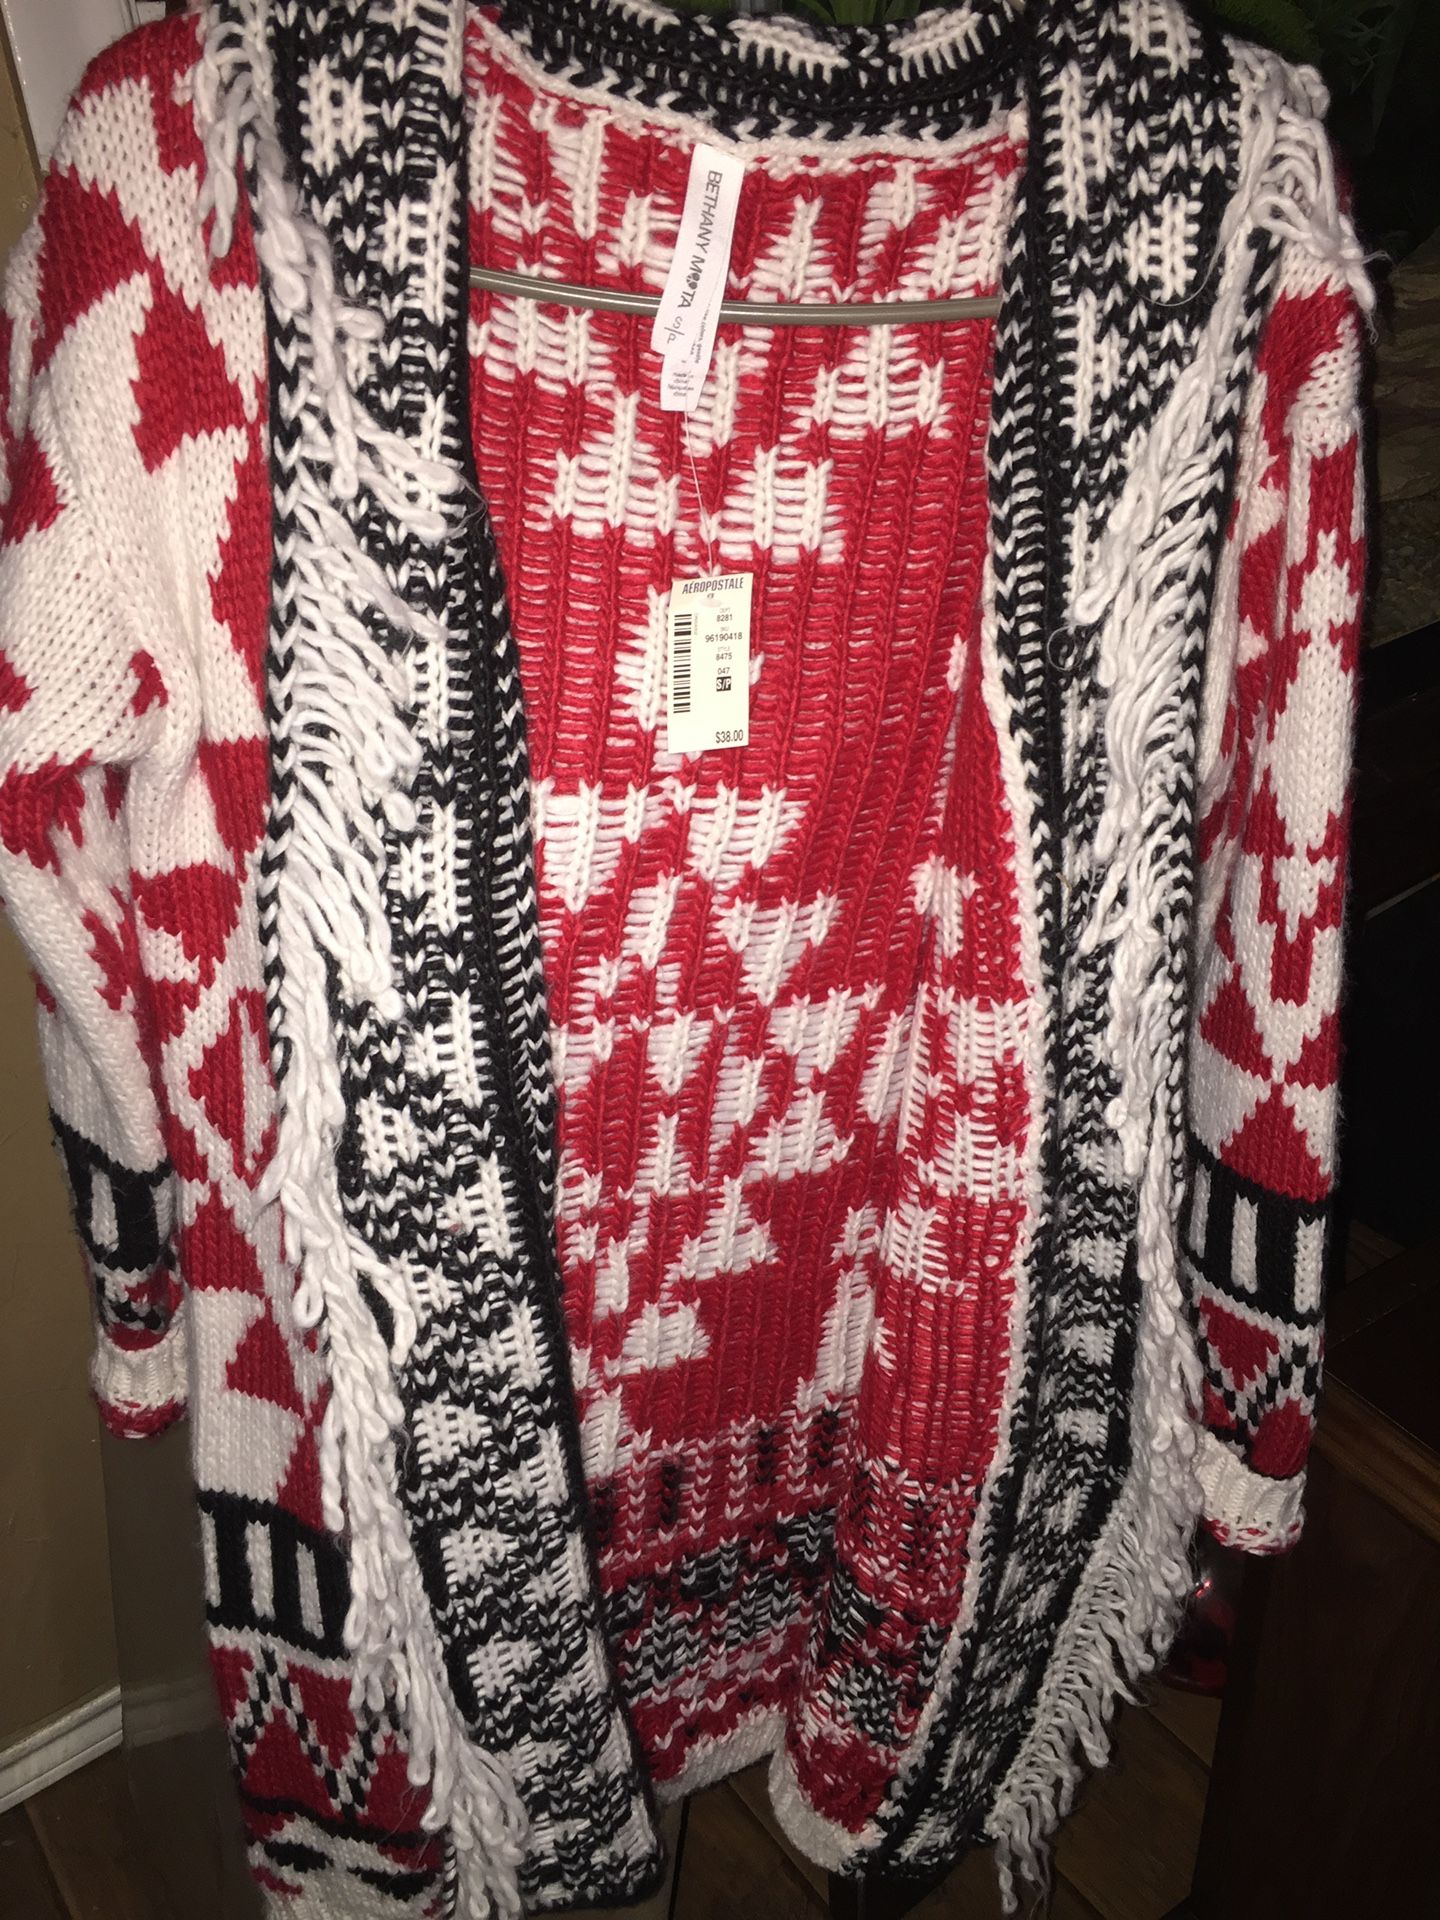 Sweater Cardigan Size Small ((from Aeropostale ))